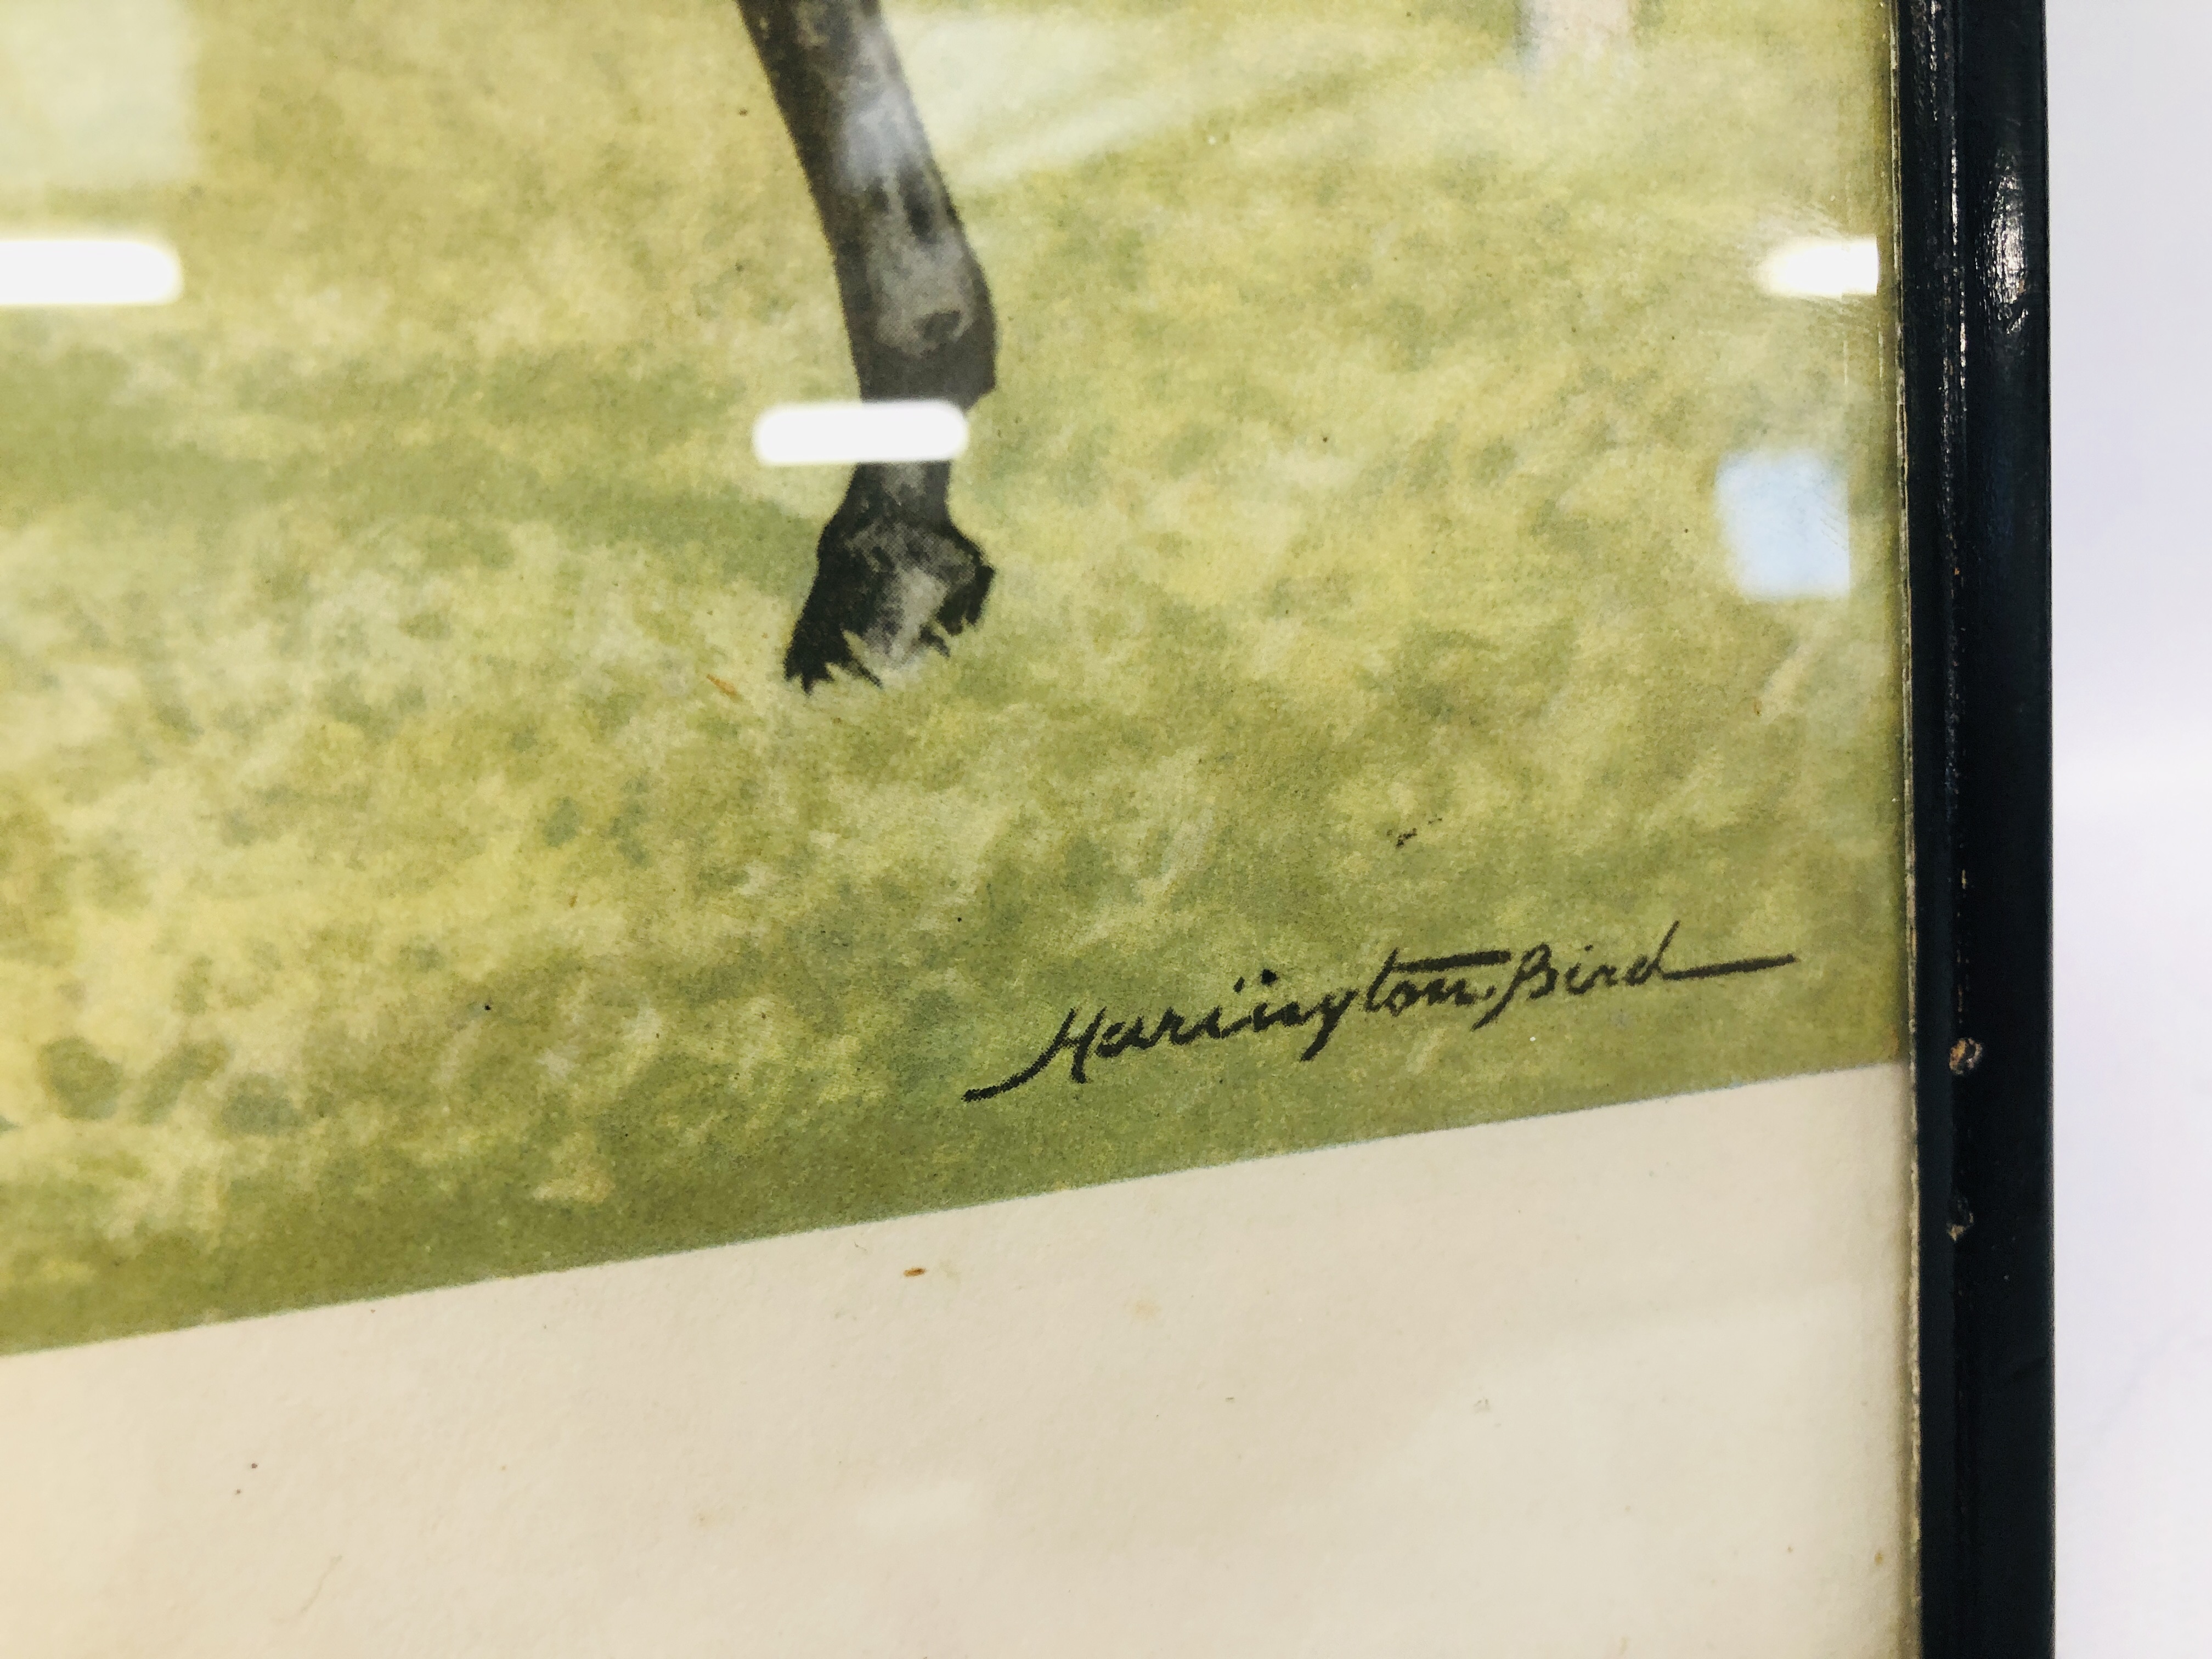 A FRAMED AND MOUNTED PRINT "PAPYRUS" WINNER OF THE DERBY 1923 RIDDEN BY DONOGHUE BEARING SIGNATURE - Image 3 of 4